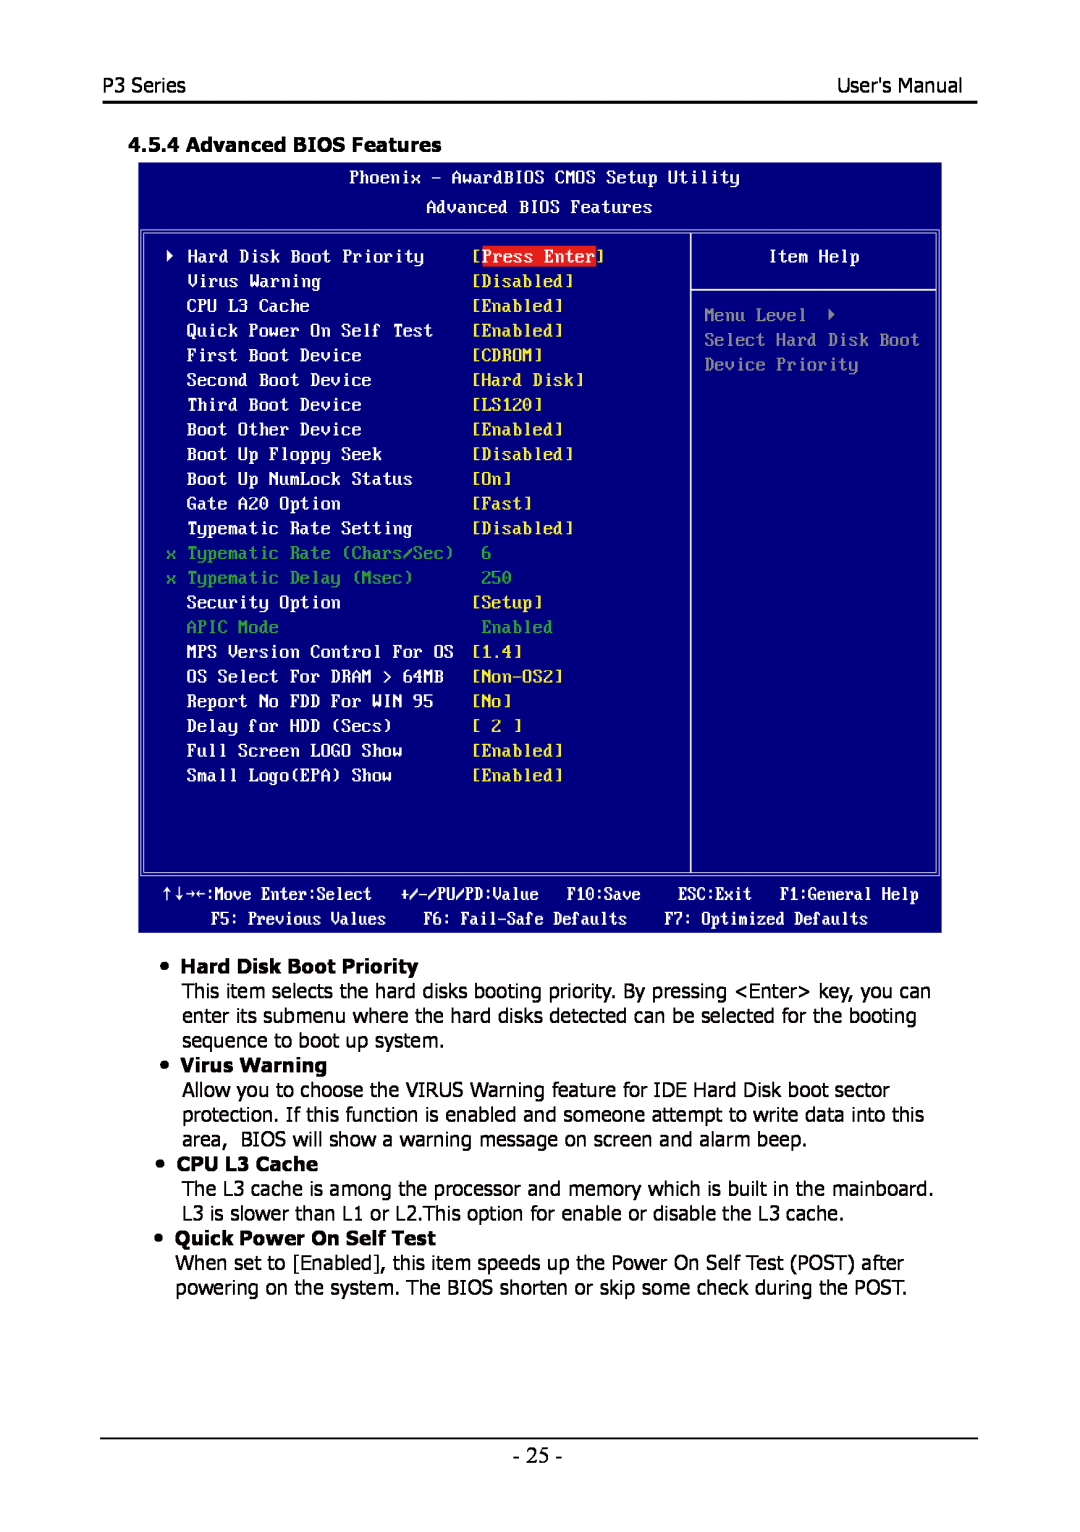 Intel 88ENEP3S00 user manual Advanced BIOS Features, ・ Hard Disk Boot Priority, ・ Virus Warning, ・ CPU L3 Cache 